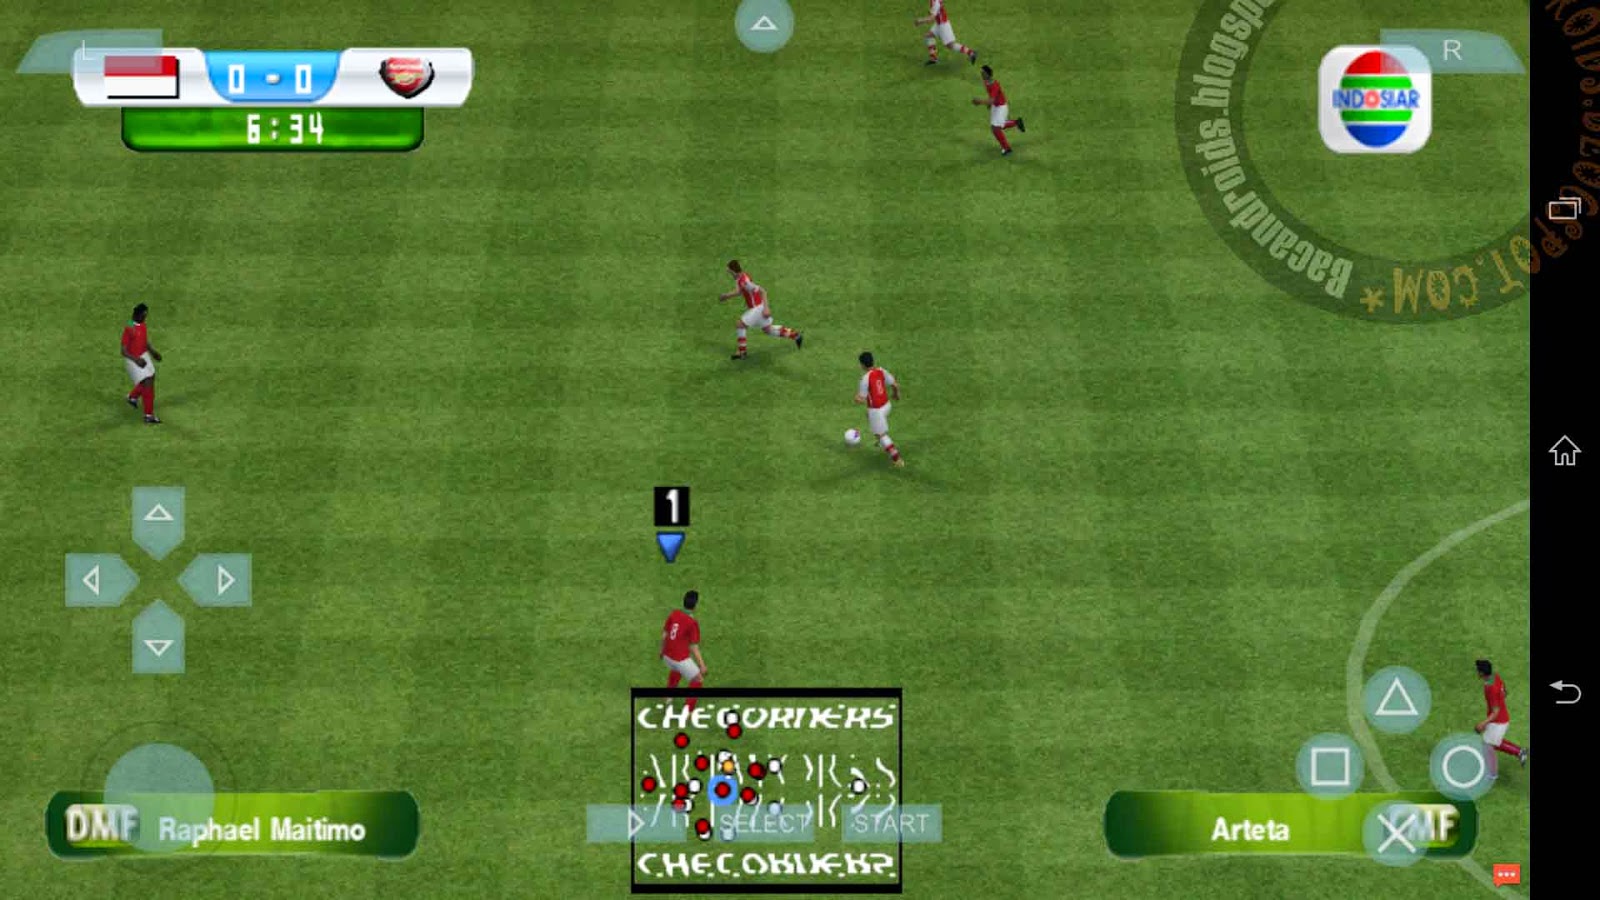 download PES 2015 iso